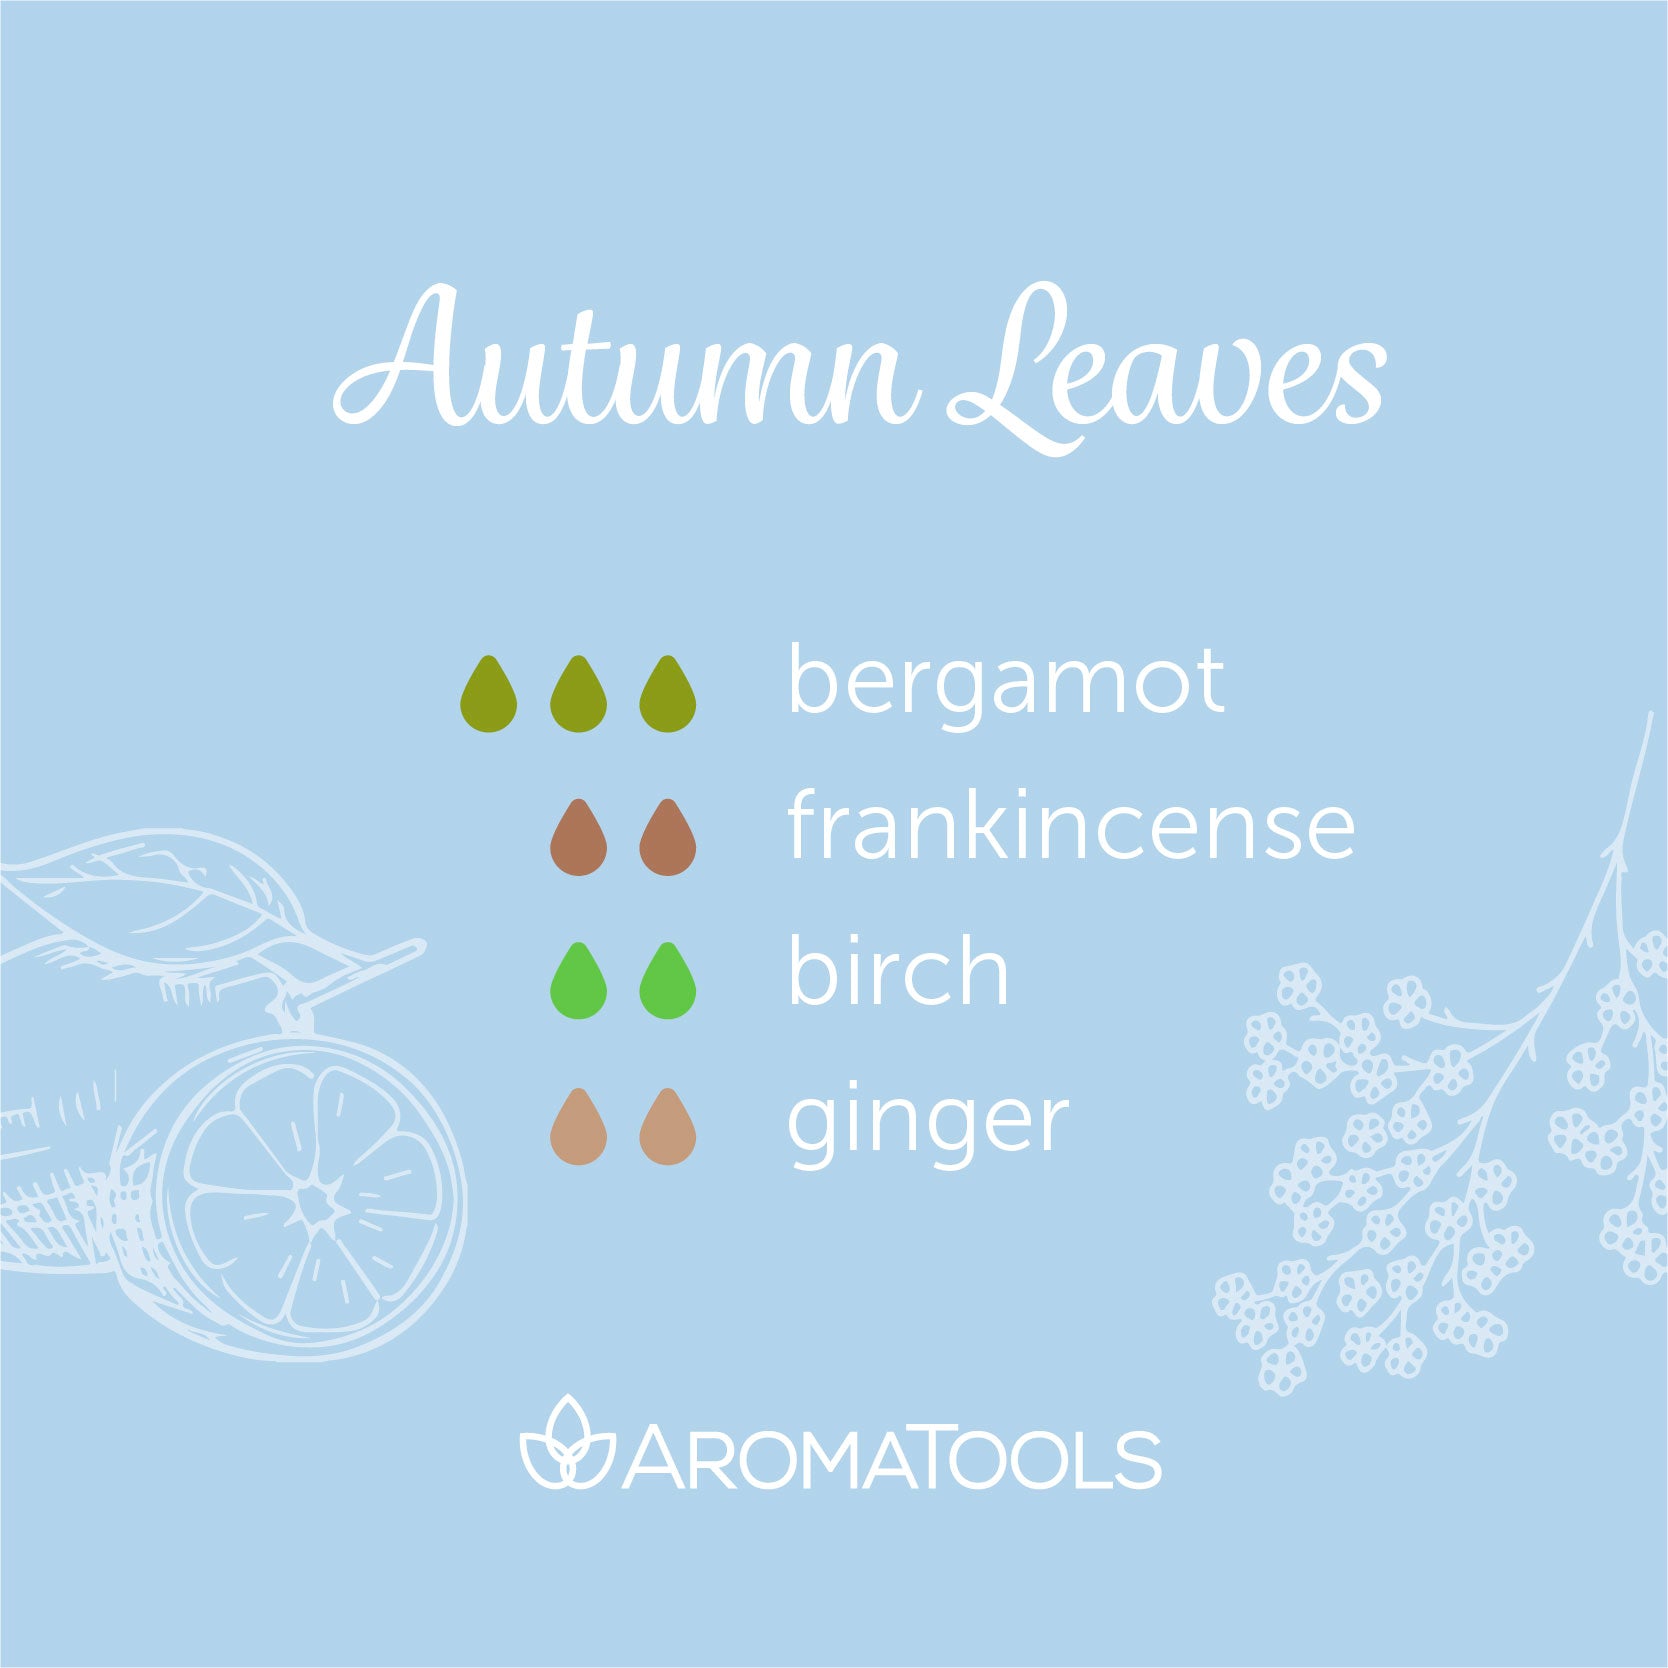 "Autumn Leaves" Diffuser Blend. Features bergamot, frankincense, birch and ginger essential oils.